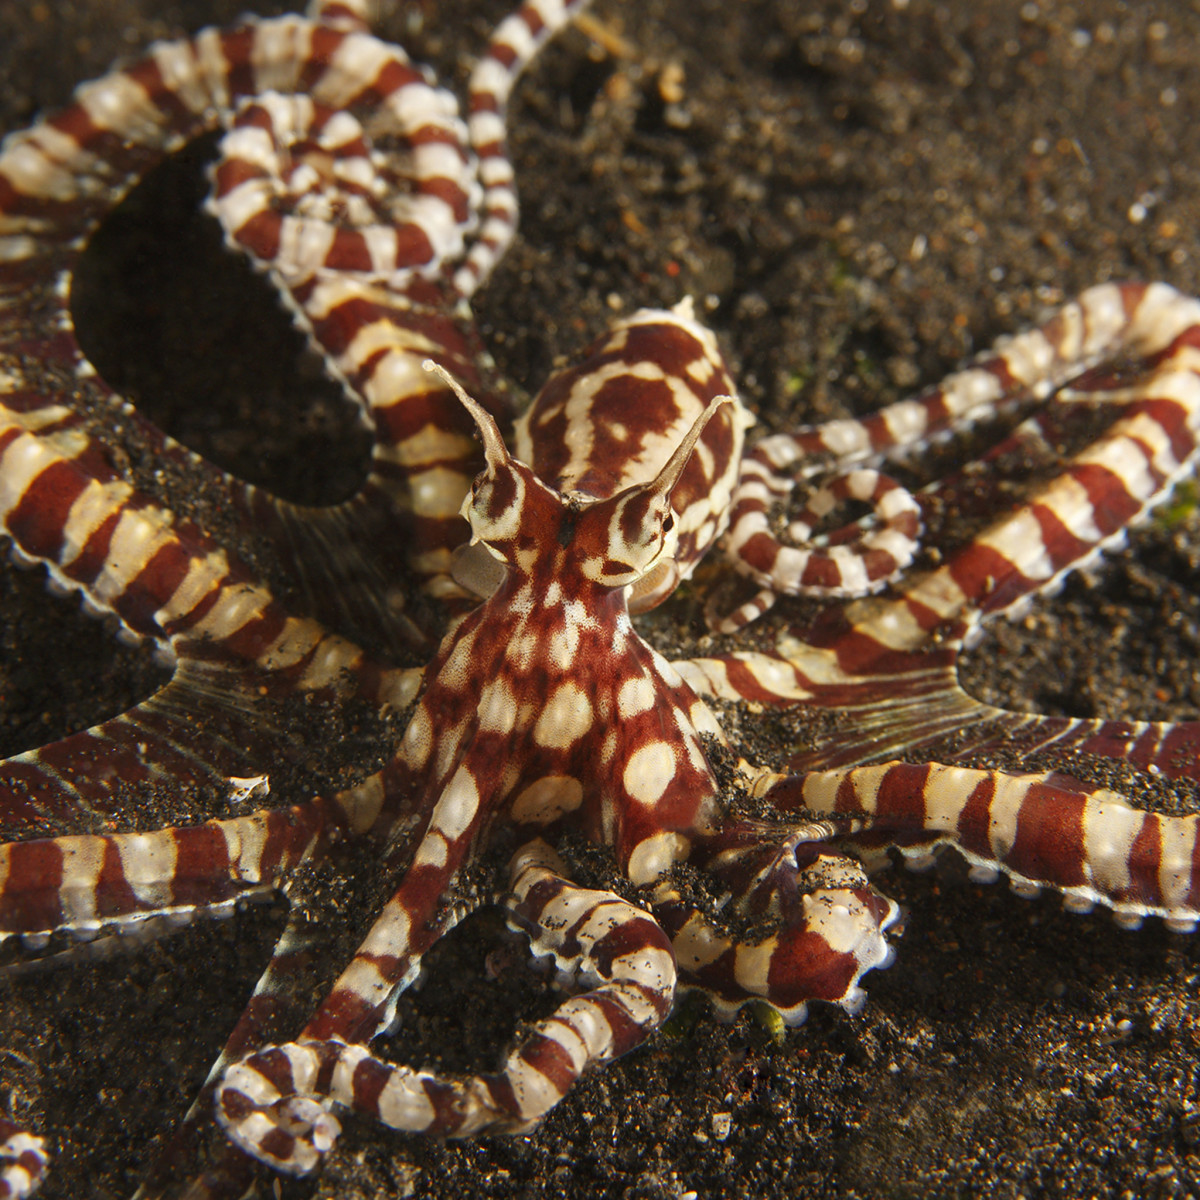 The Mimic Octopus, Master of Disguise